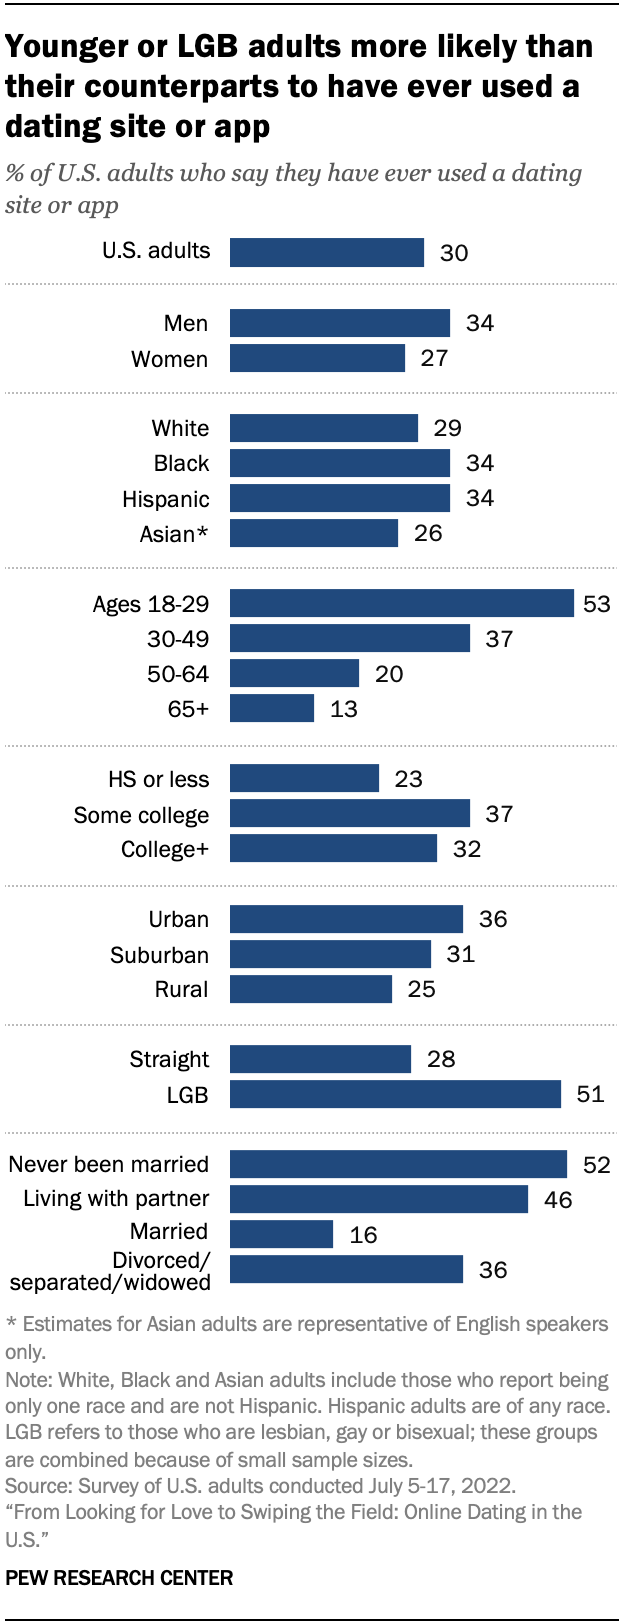 A bar chart showing that younger or LGB adults are more likely than their counterparts to have ever used a dating site or app